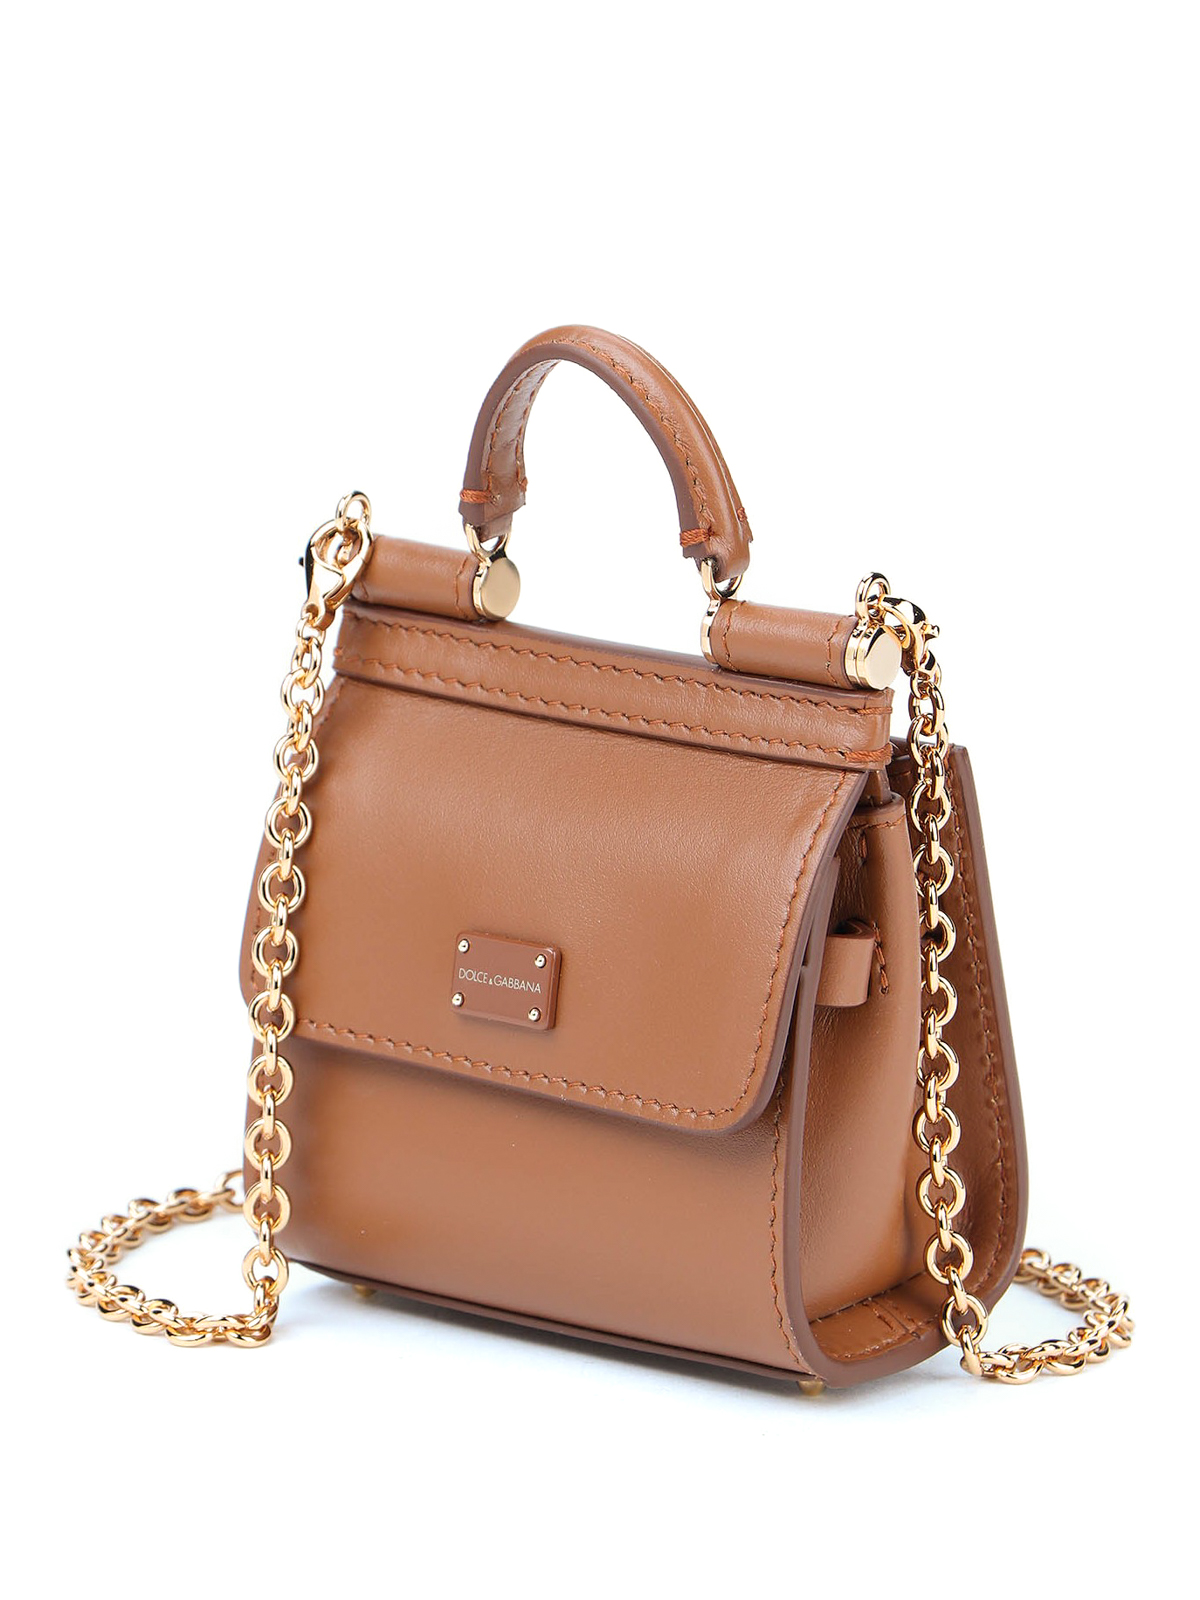 Sicily leather crossbody bag Dolce & Gabbana Camel in Leather